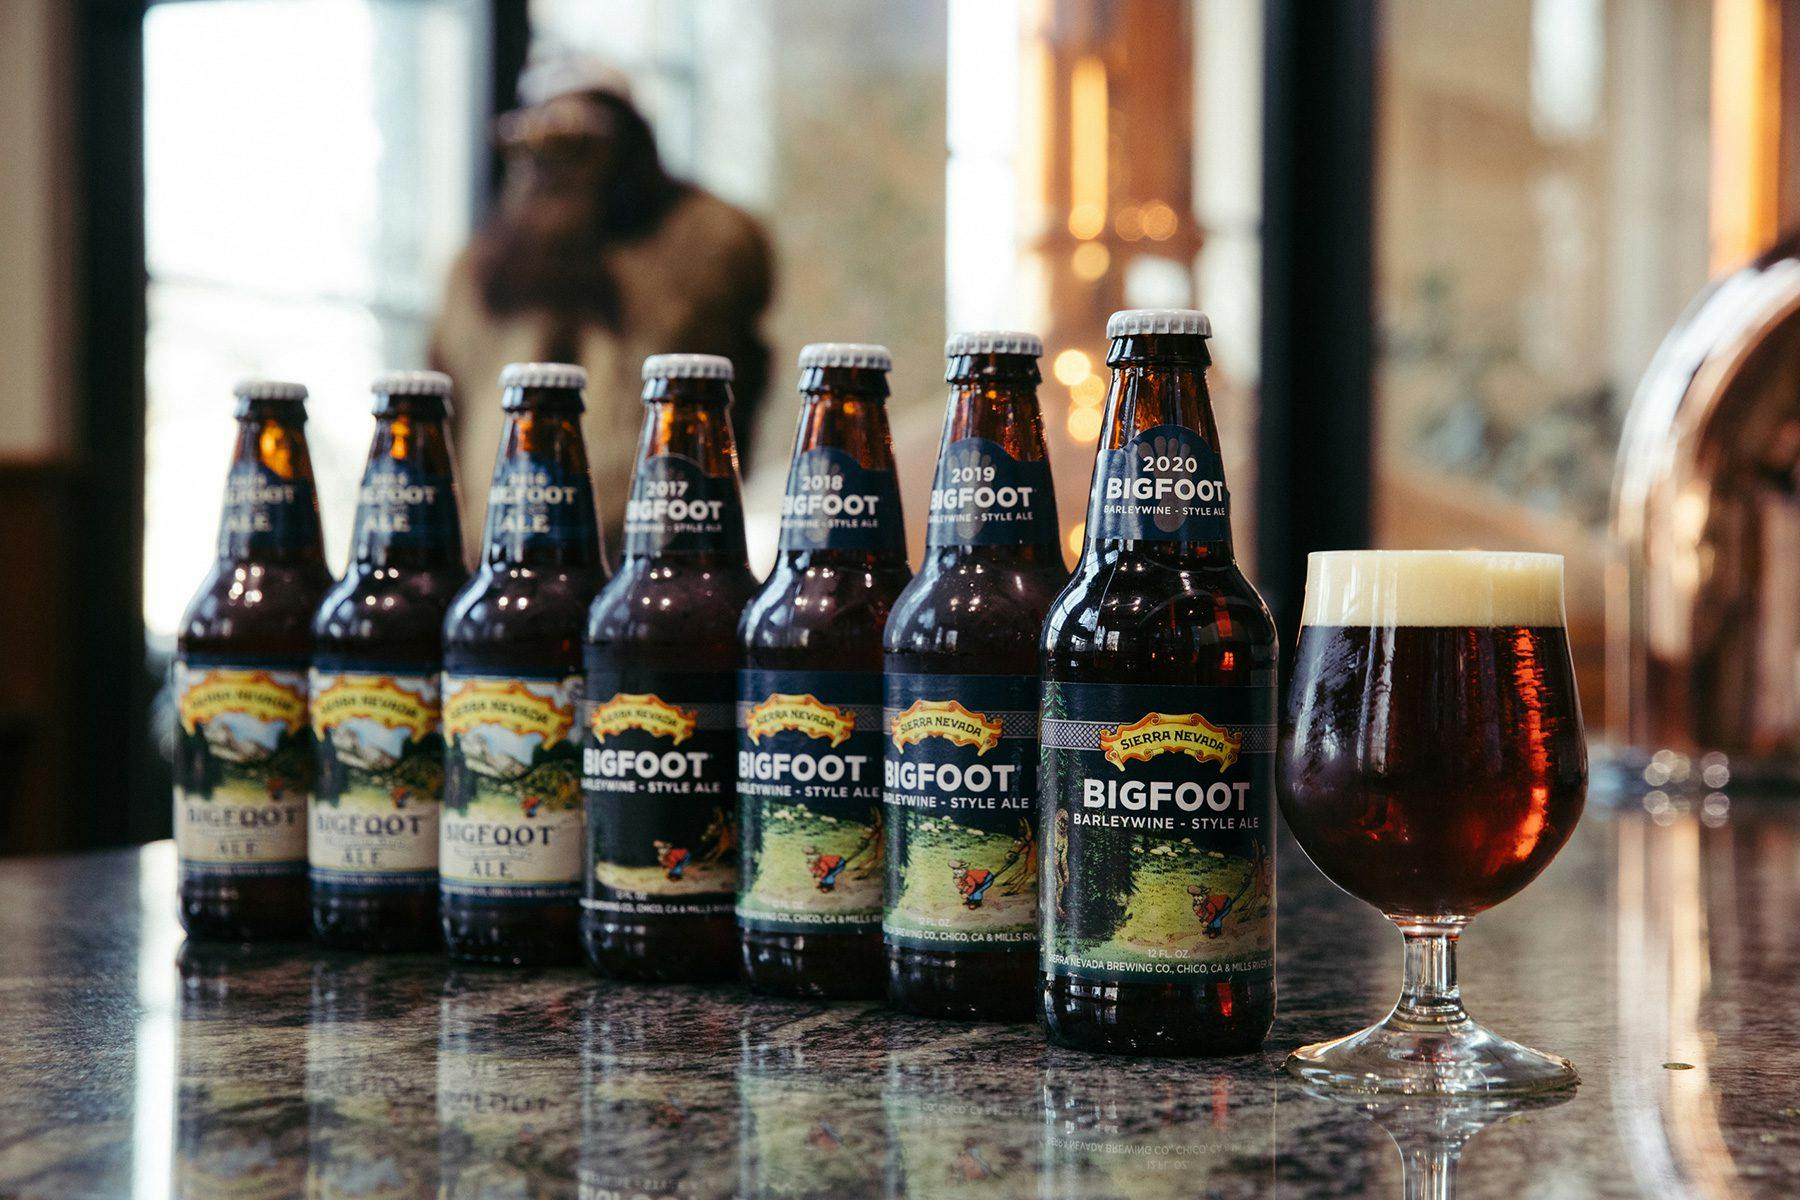 Seven bottles of Bigfoot Barleywine, each from a different release year